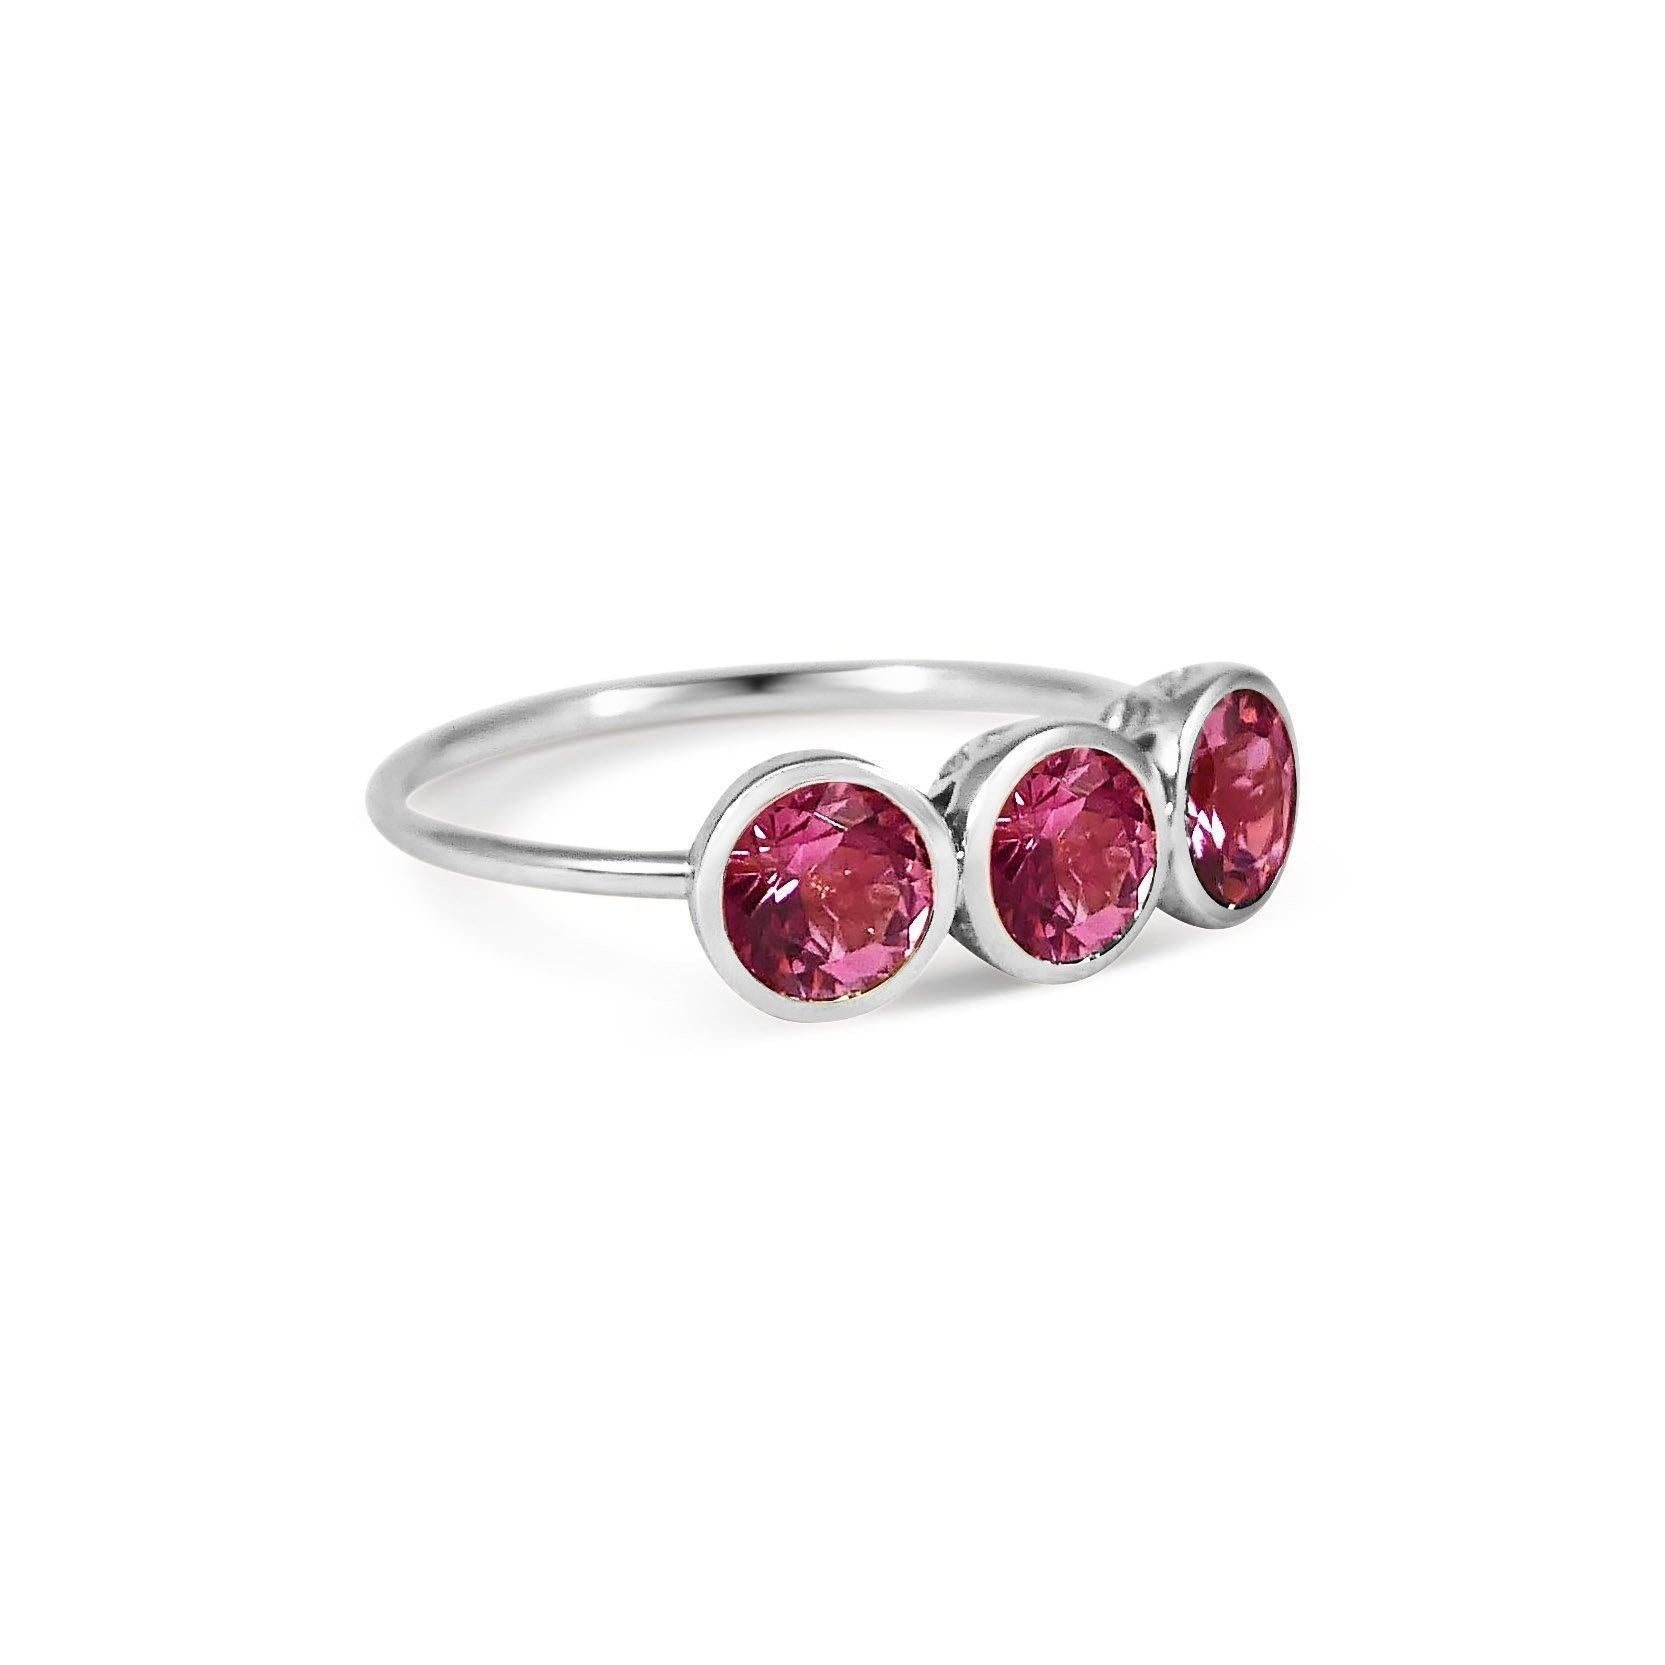 For Sale:  Handcrafted 1.50 Carats Pink Tourmaline 18 Karat White Gold Three-Stone Ring 3